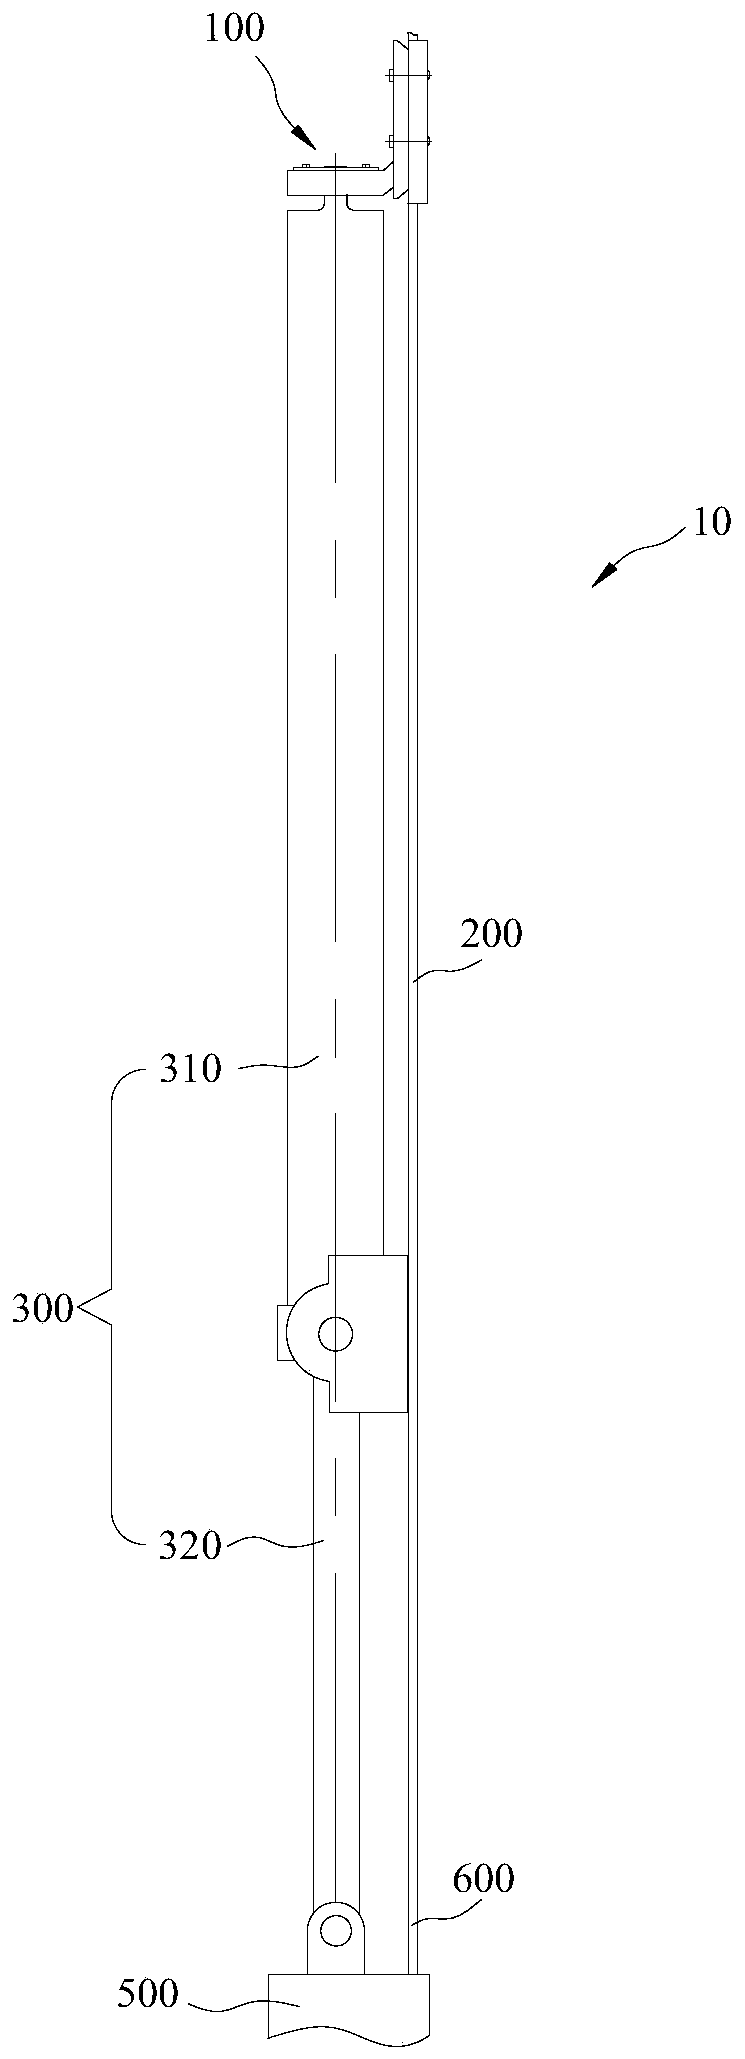 A flexible connection device at the tail end of a pressurized oil cylinder and a rotary drilling rig